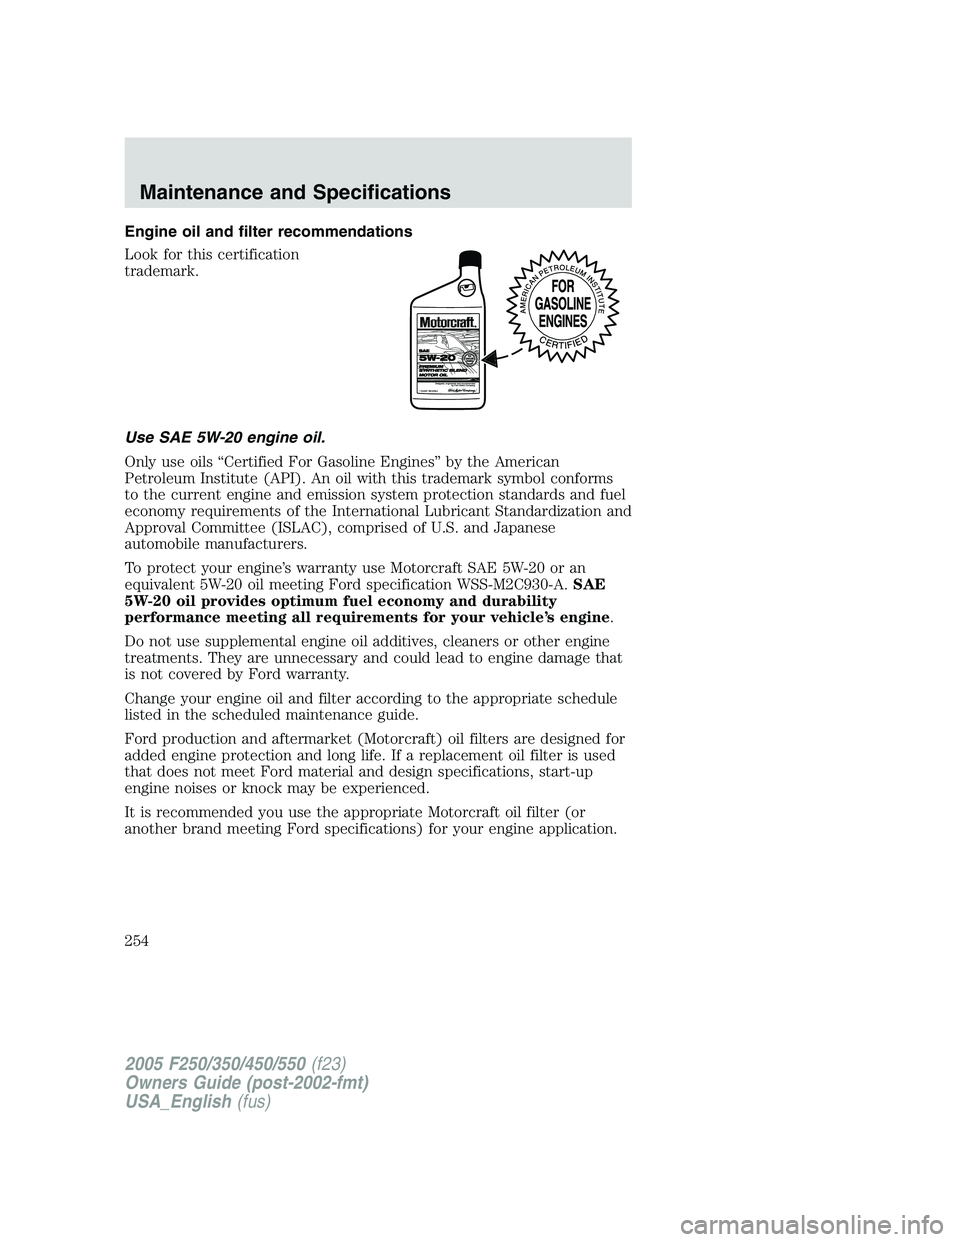 FORD F250 SUPER DUTY 2005  Owners Manual Engine oil and filter recommendations
Look for this certification
trademark.
Use SAE 5W-20 engine oil.
Only use oils “Certified For Gasoline Engines” by the American
Petroleum Institute (API). An 